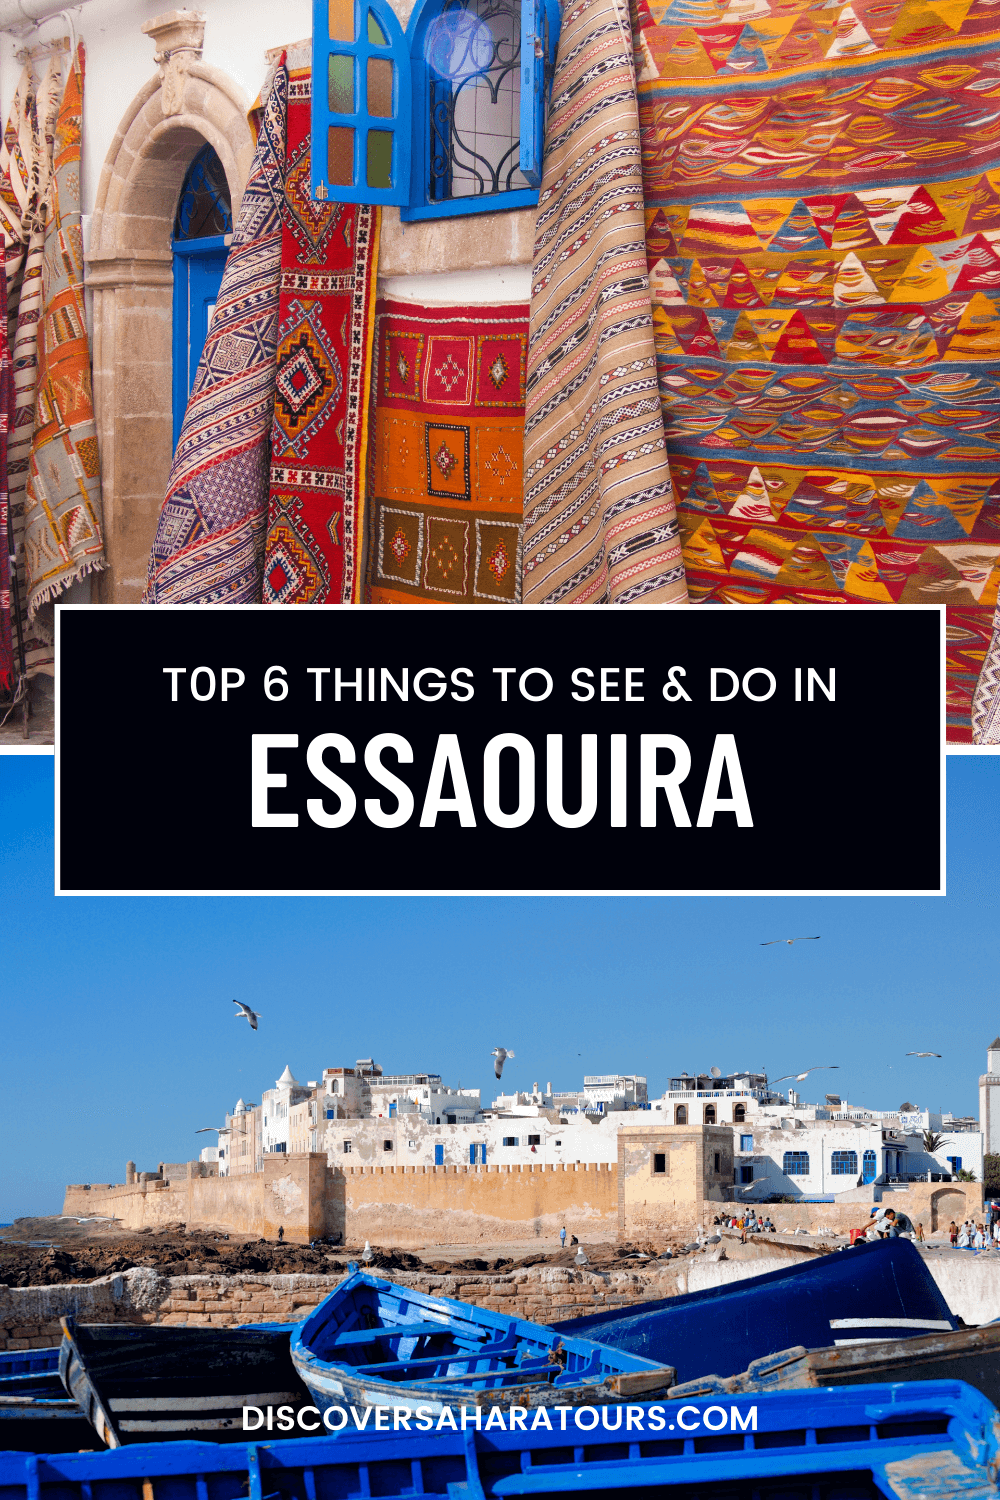 Top 6 Things to See & Do in Essaouira